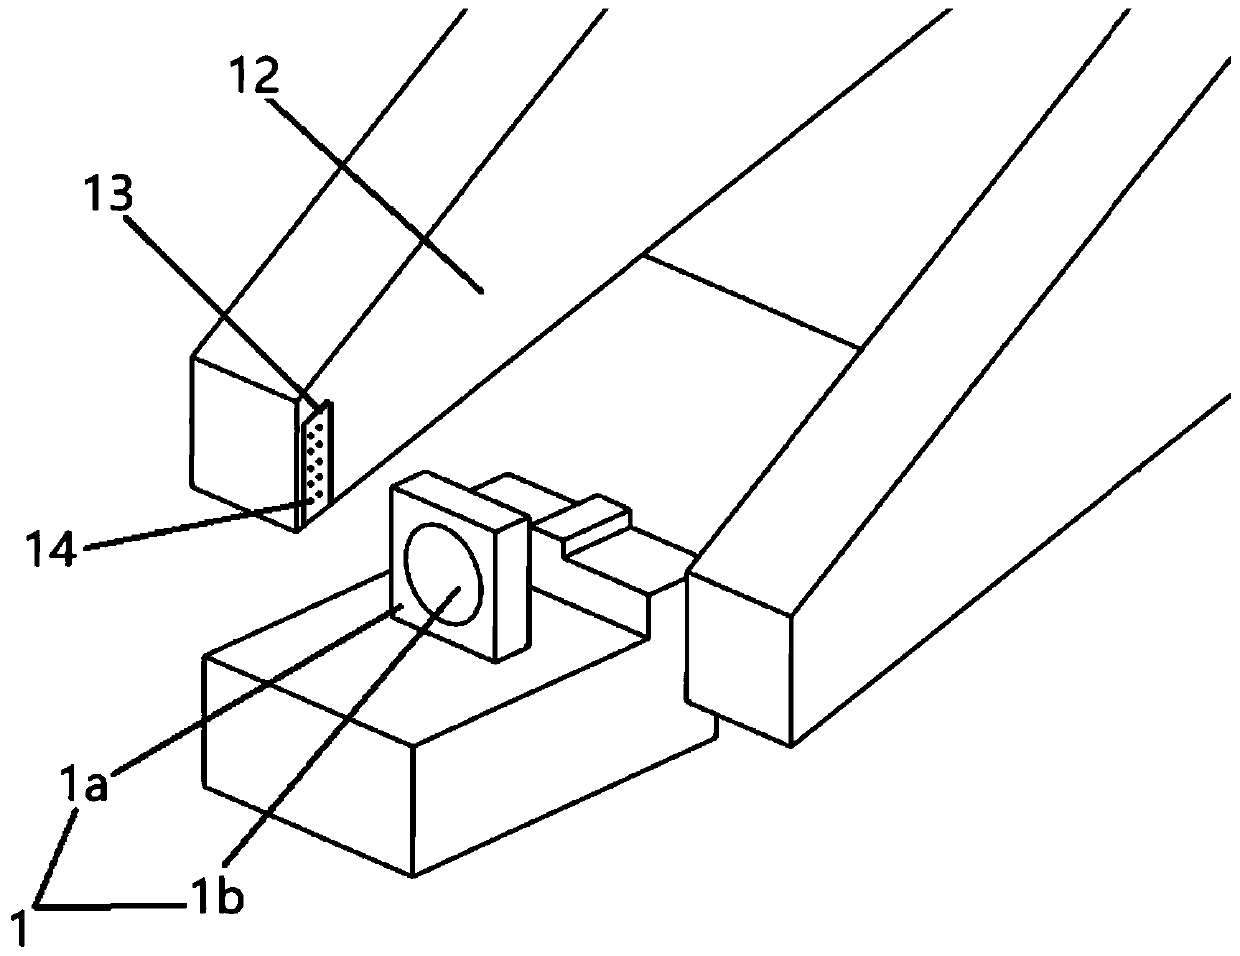 Lens coupling fixture based on voice coil motor driving